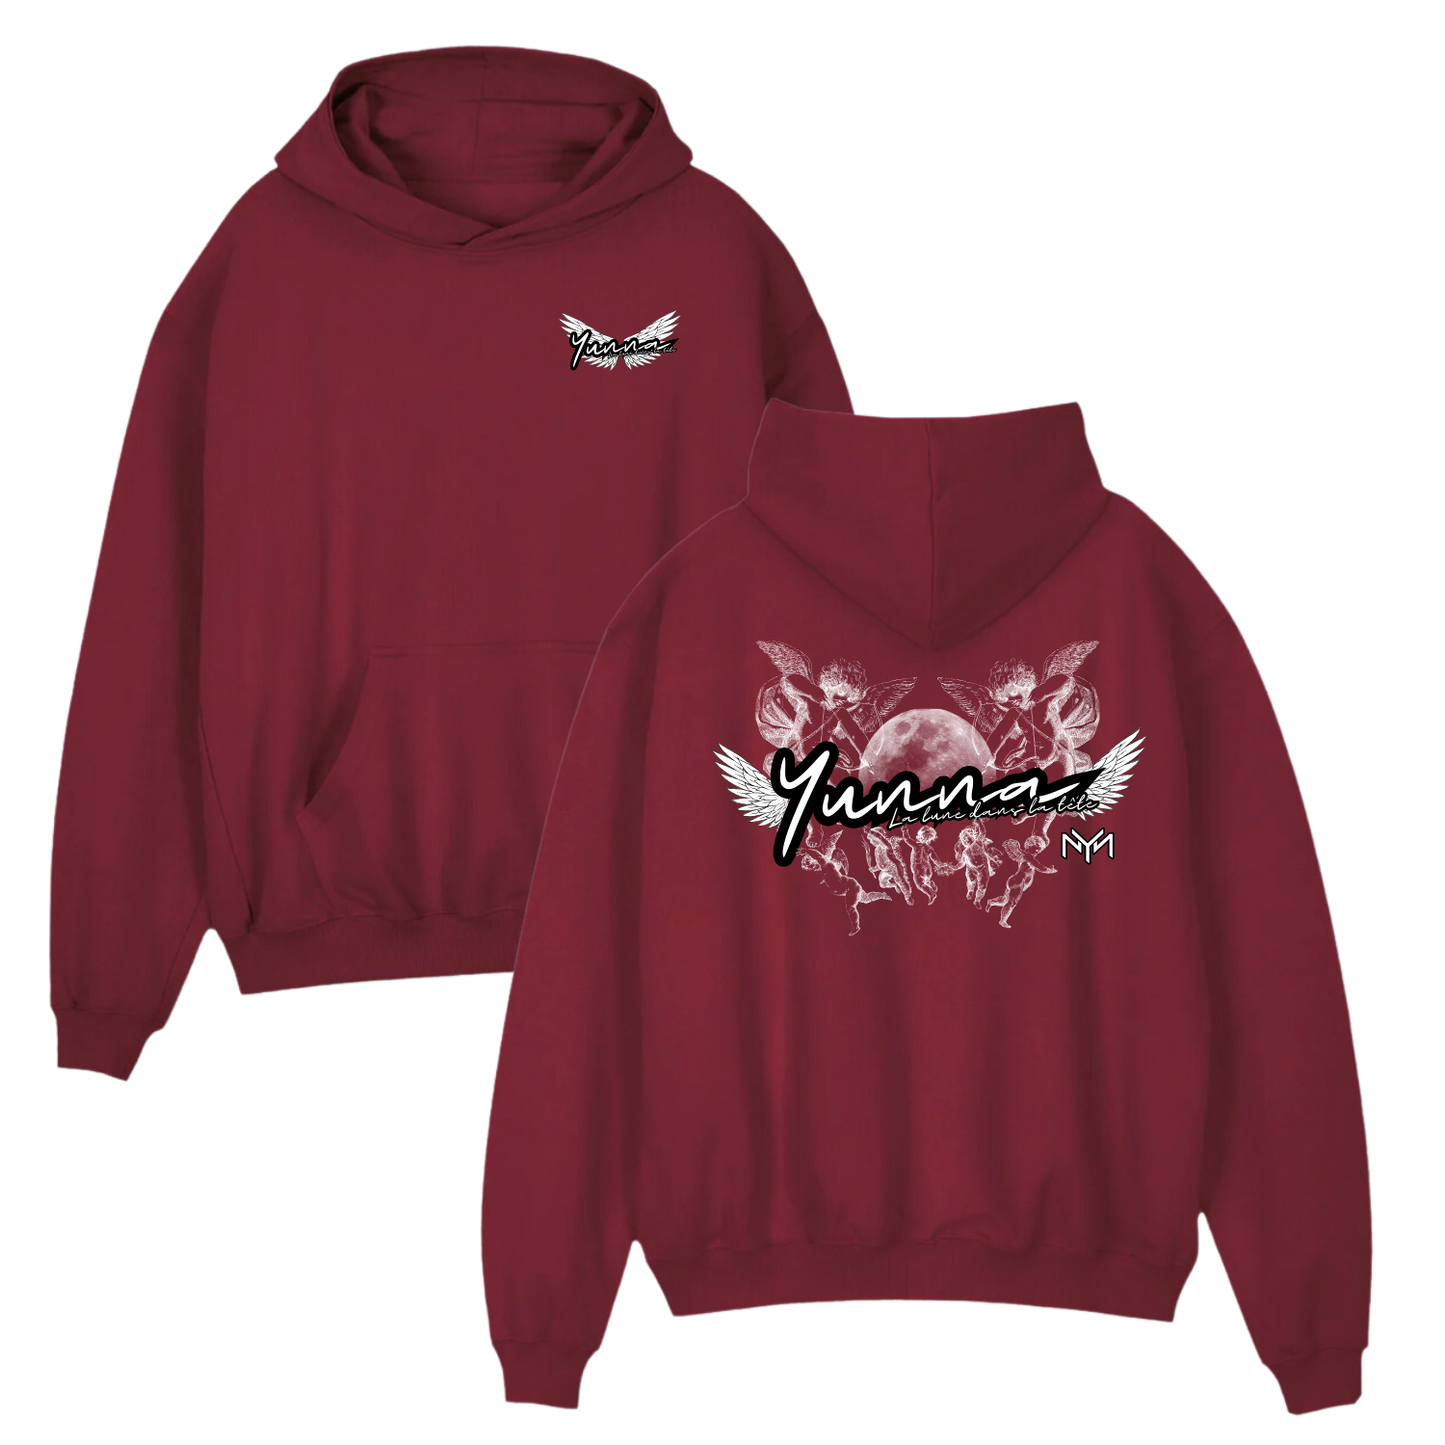 Hoodie Bordeaux - Personnalisation - Yunna France